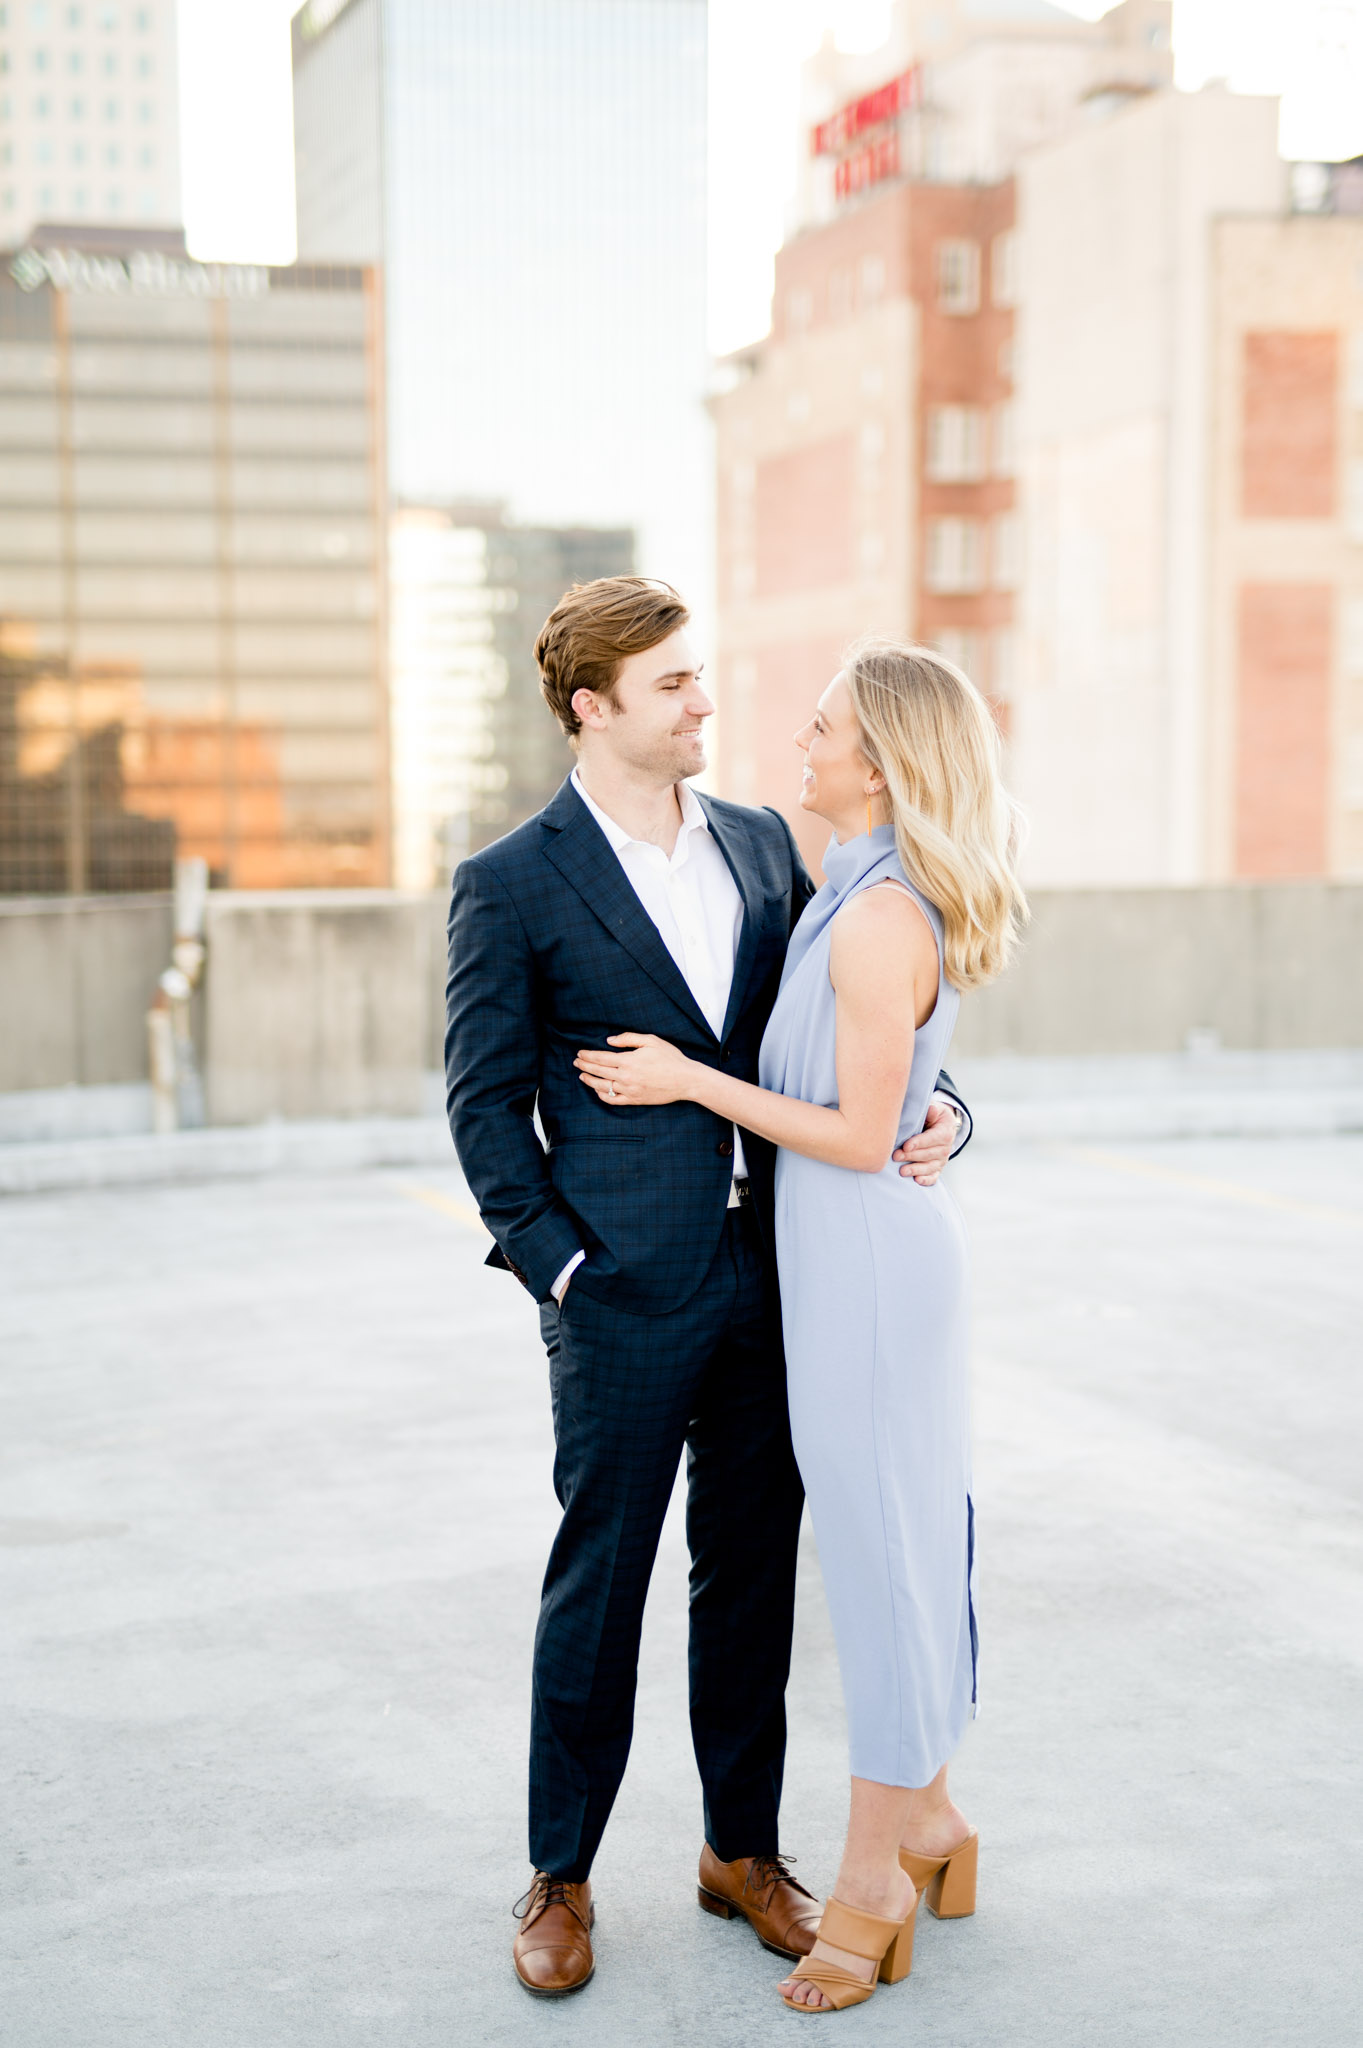 Couple smile at each other on city rooftop.